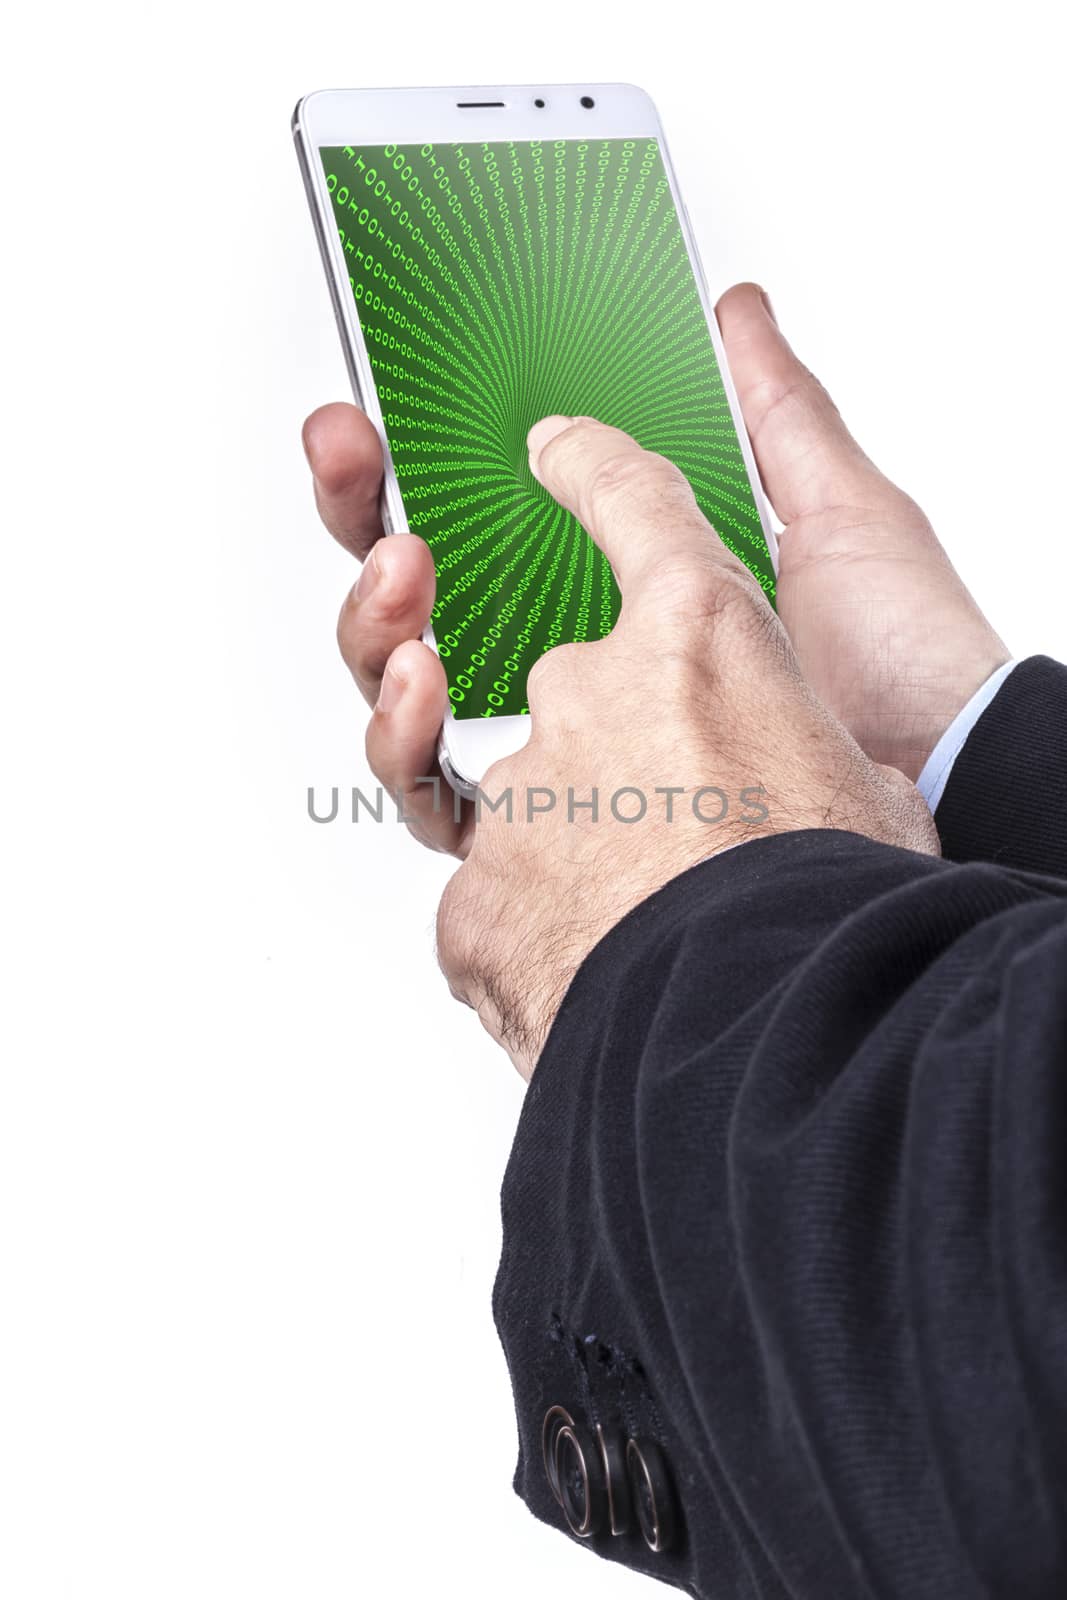 Smartphone in hands isolated on white background